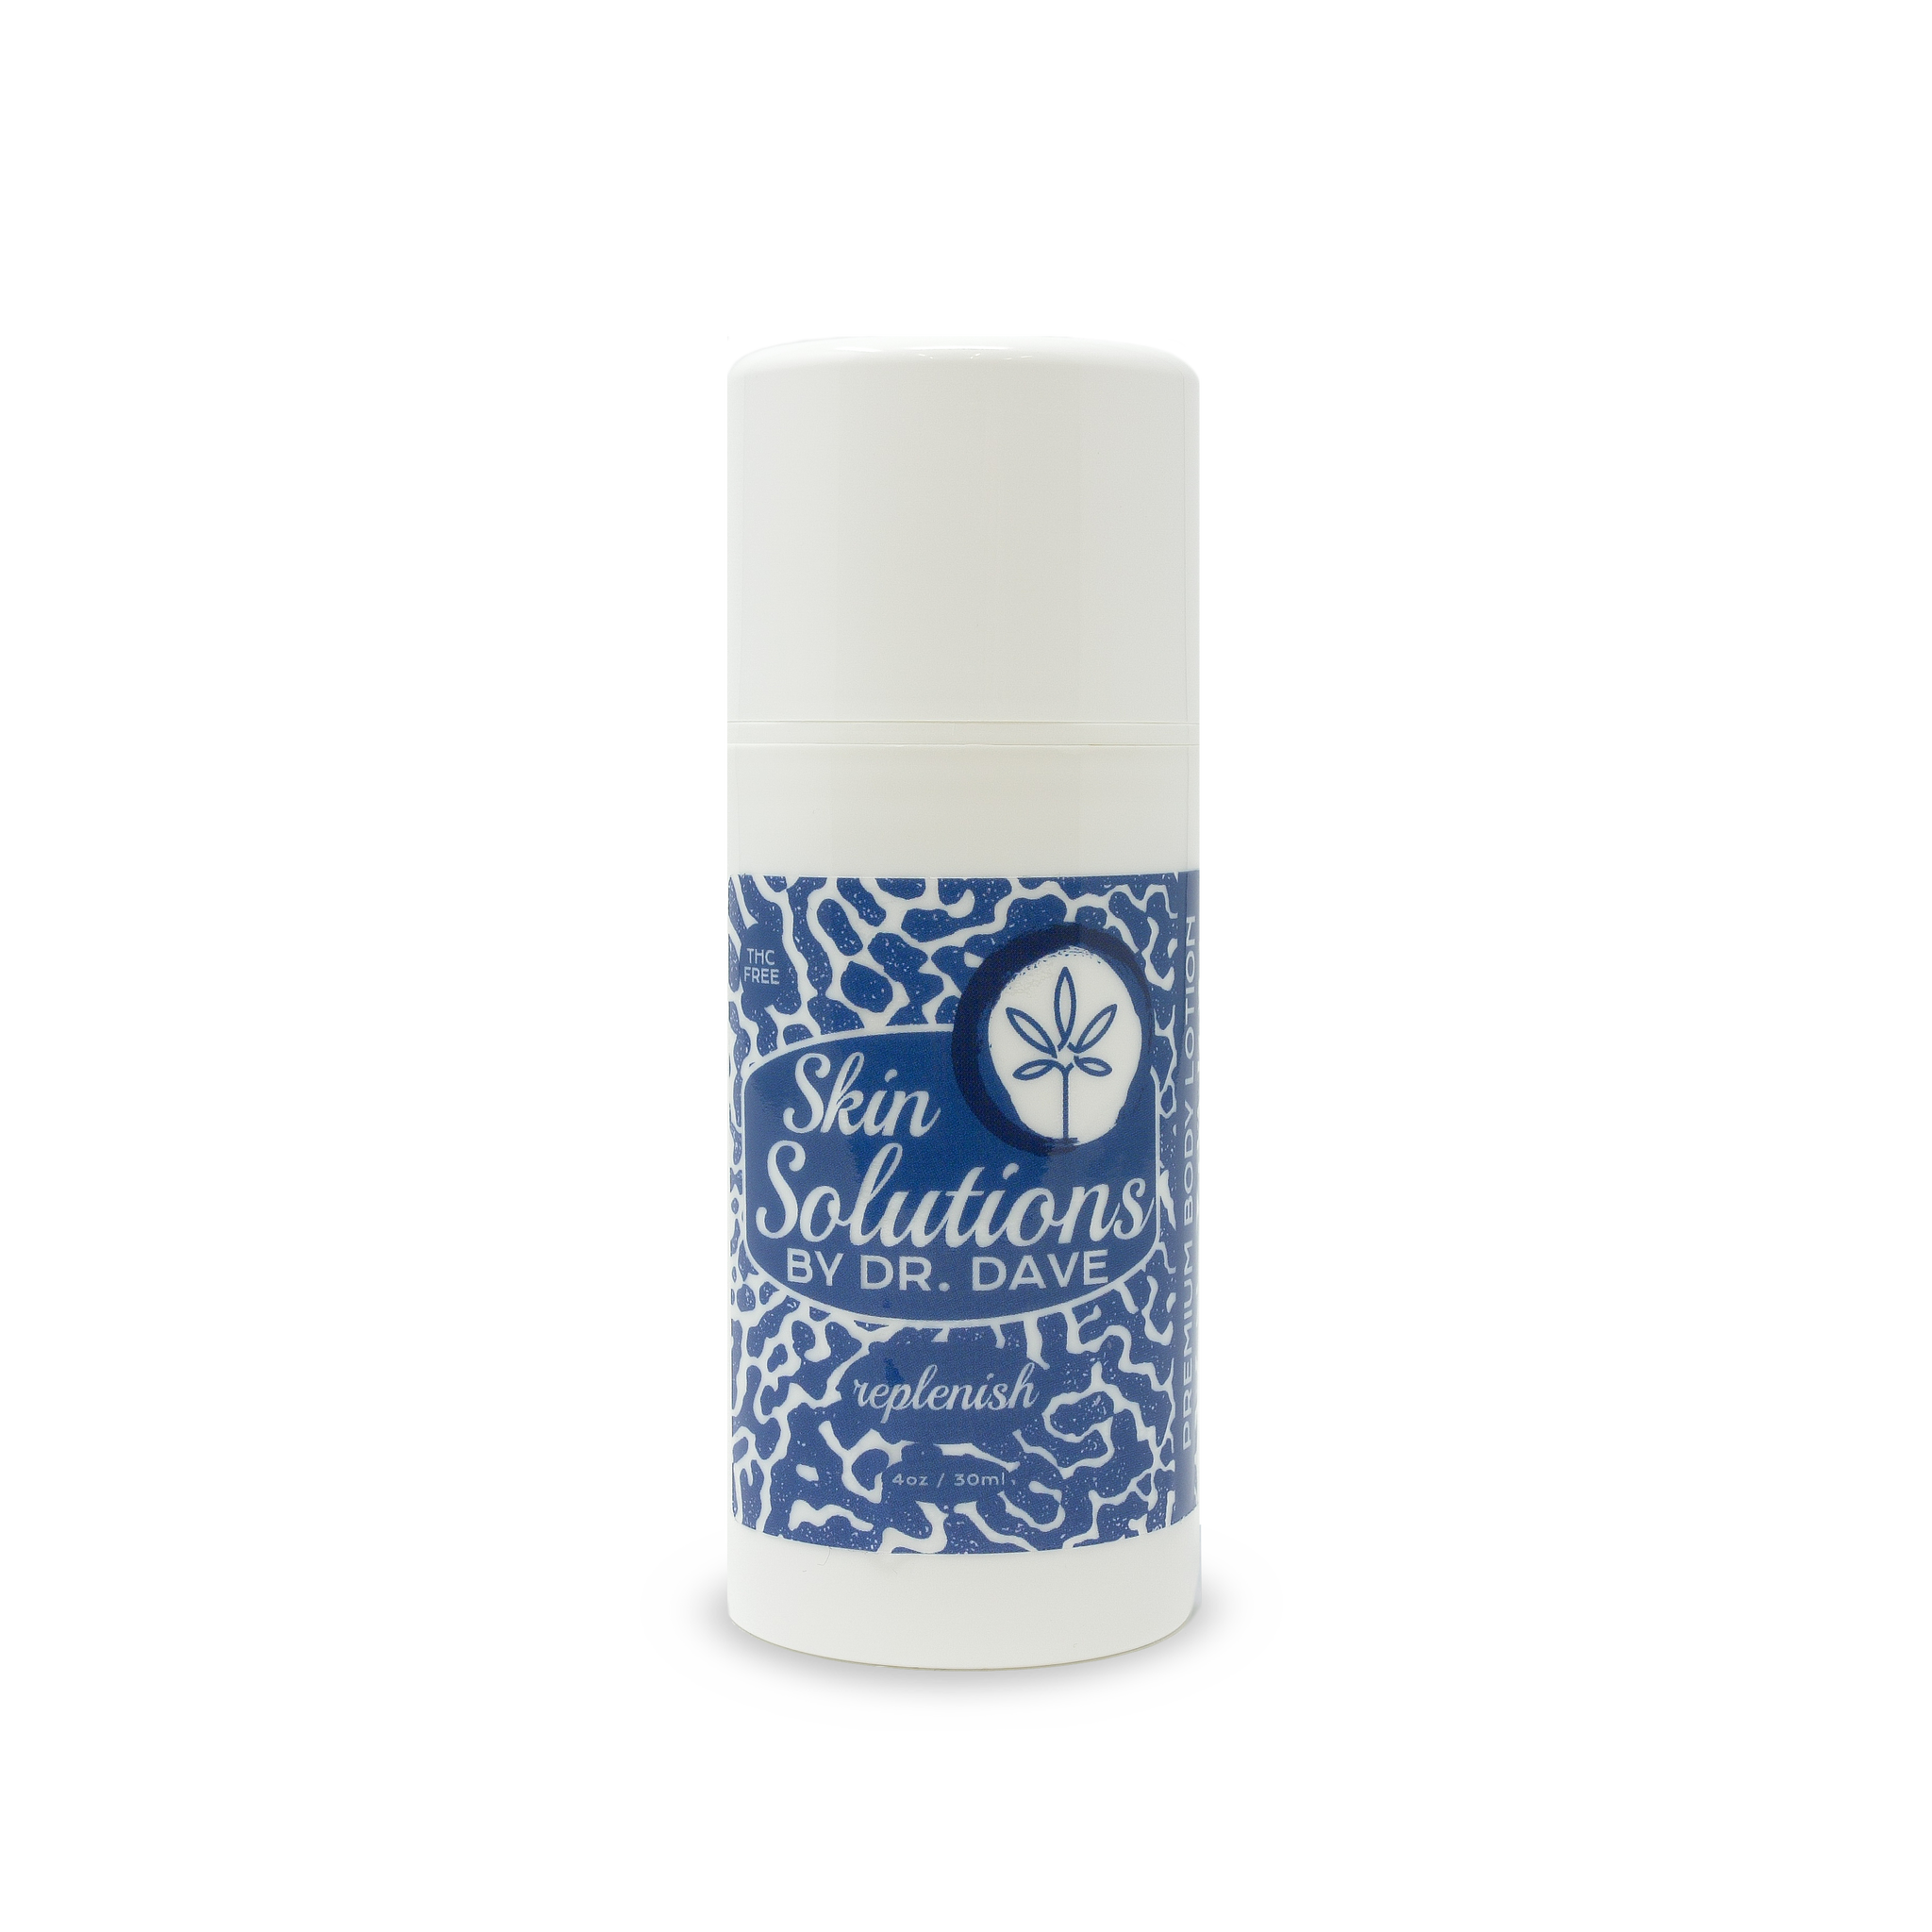 a picture of the skin solutions C B D lotion. The bottle is tall and white with a blue label. The label has a speckled pattern and says skin solutions by doctor dave replenish. Te solutions by doctor dave logo is on the top right corner. It is a zen circle with a leaf inside.